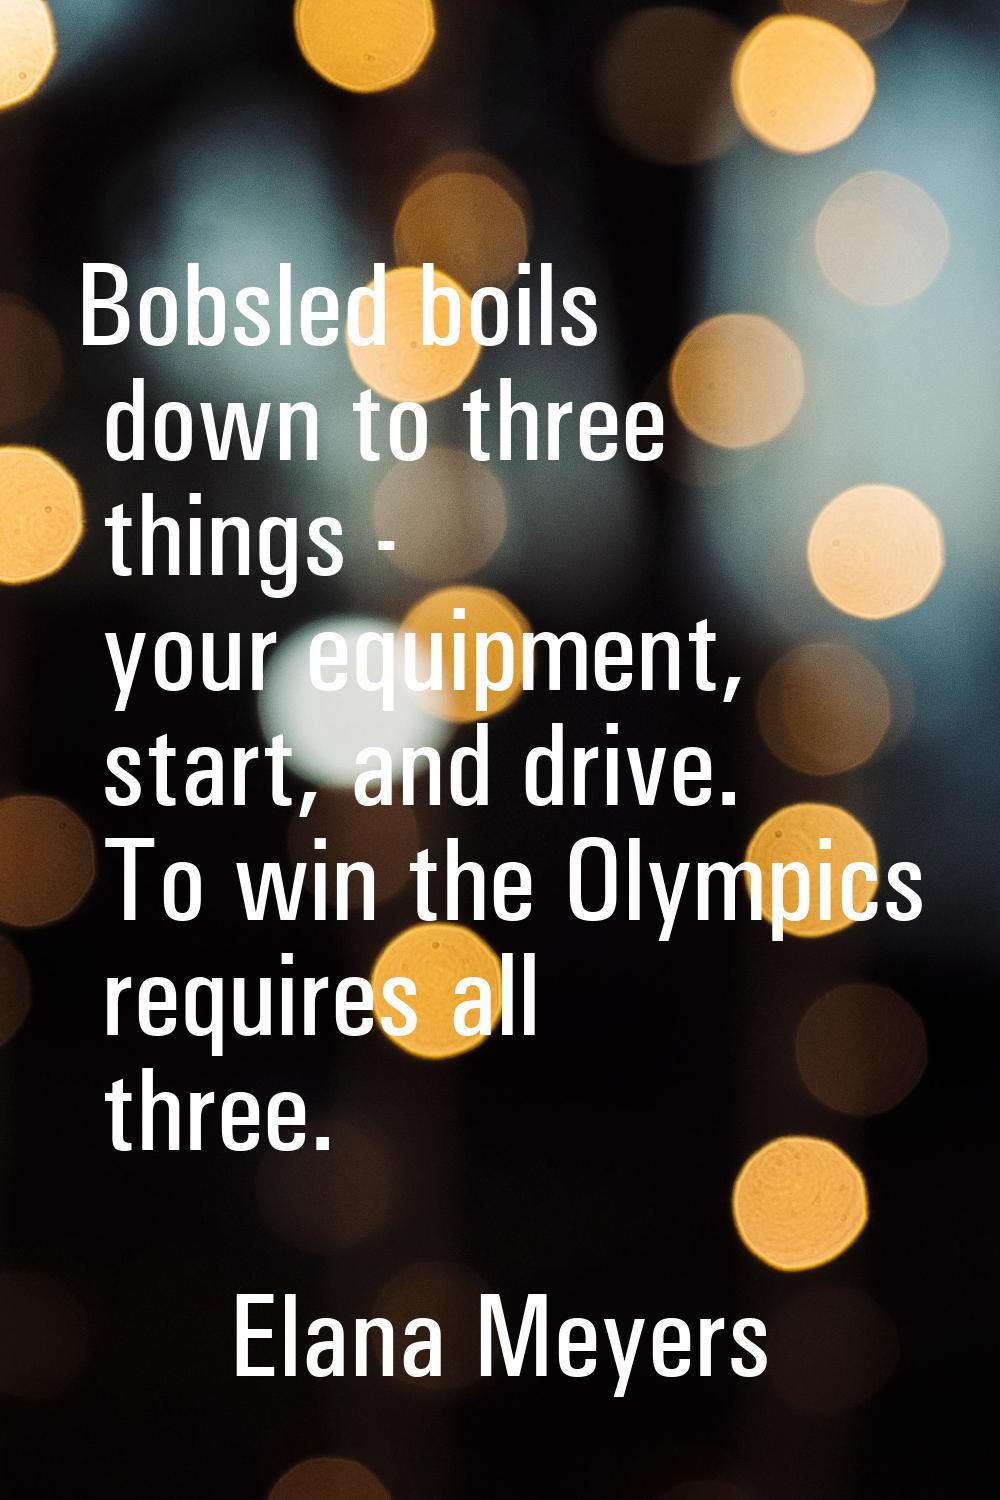 Bobsled boils down to three things - your equipment, start, and drive. To win the Olympics requires